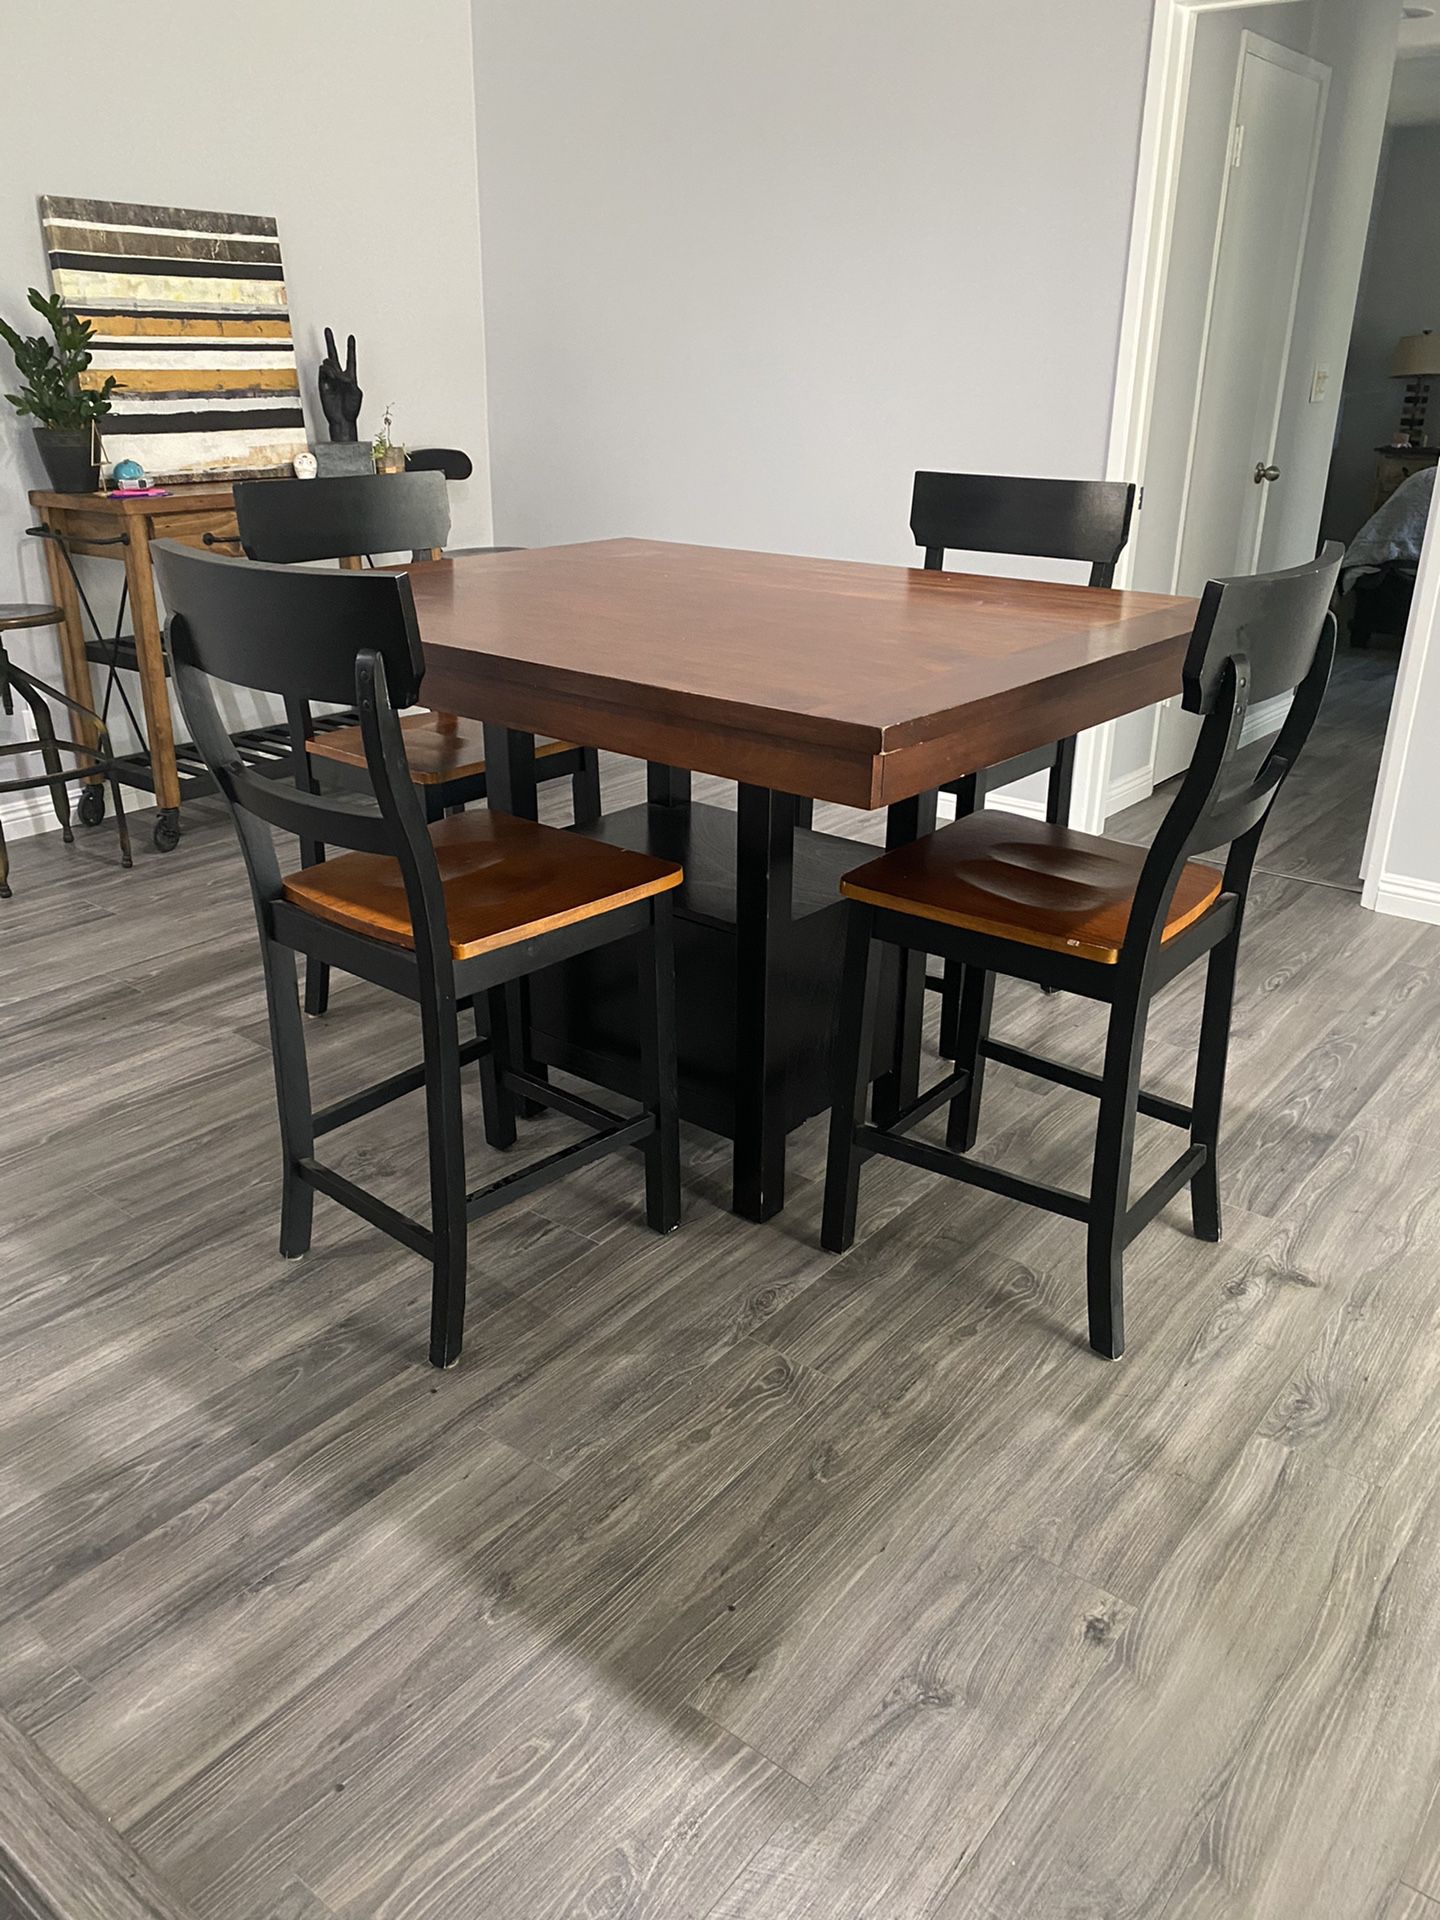 Kitchen / dining room tall table with 4 chairs